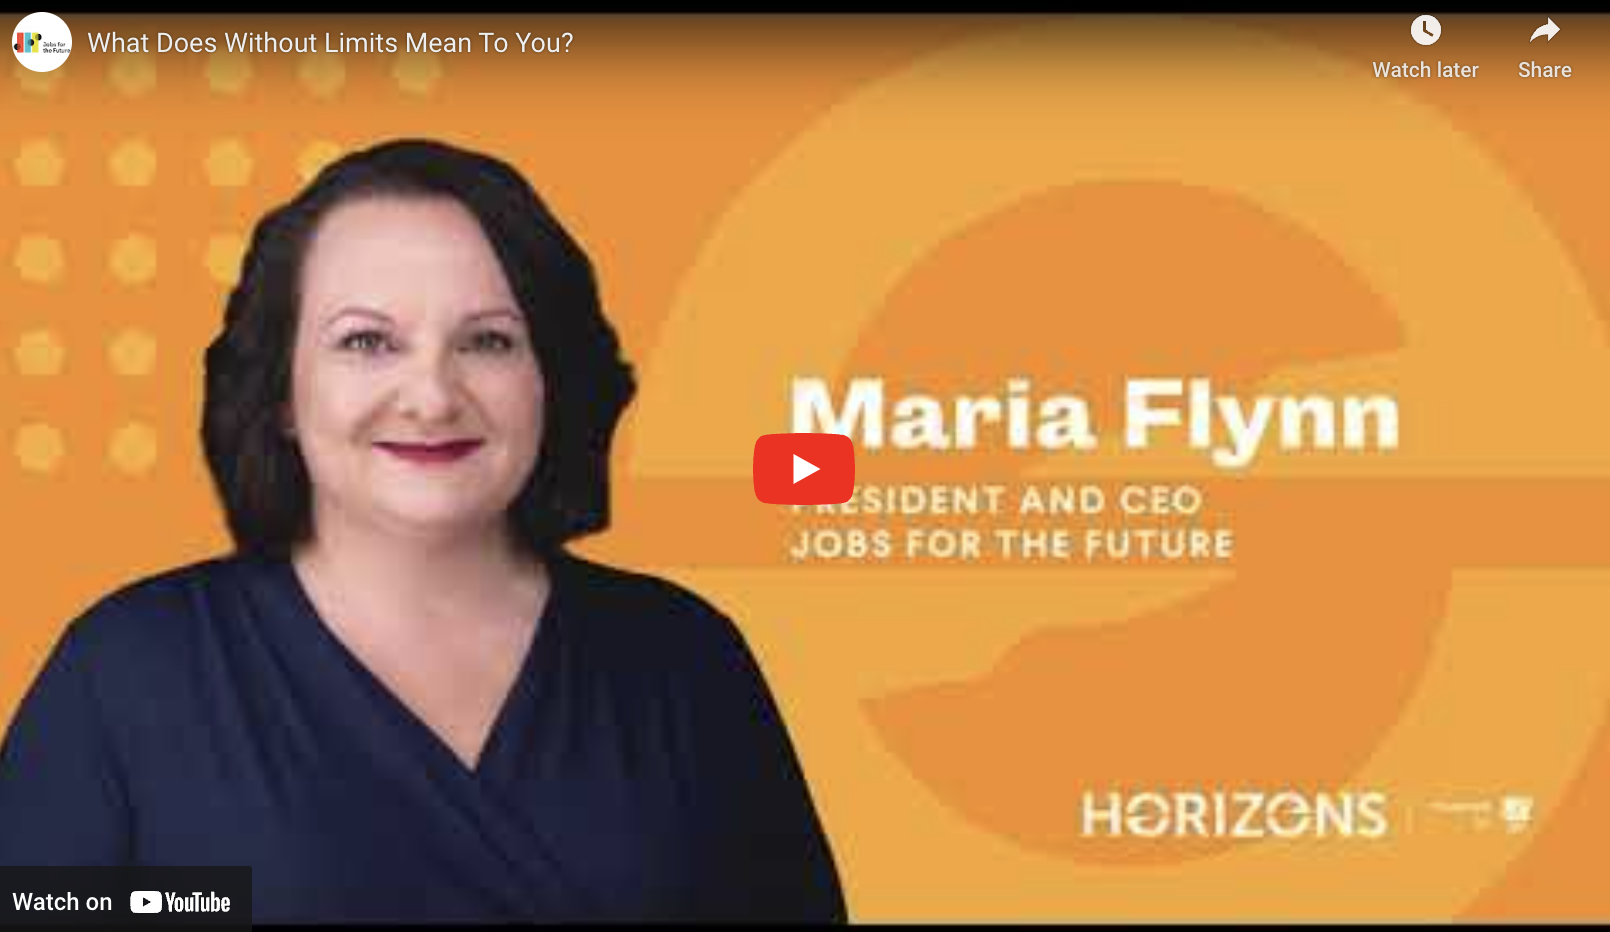 Maria Flynn, President and CEO, Jobs for the Future (JFF)